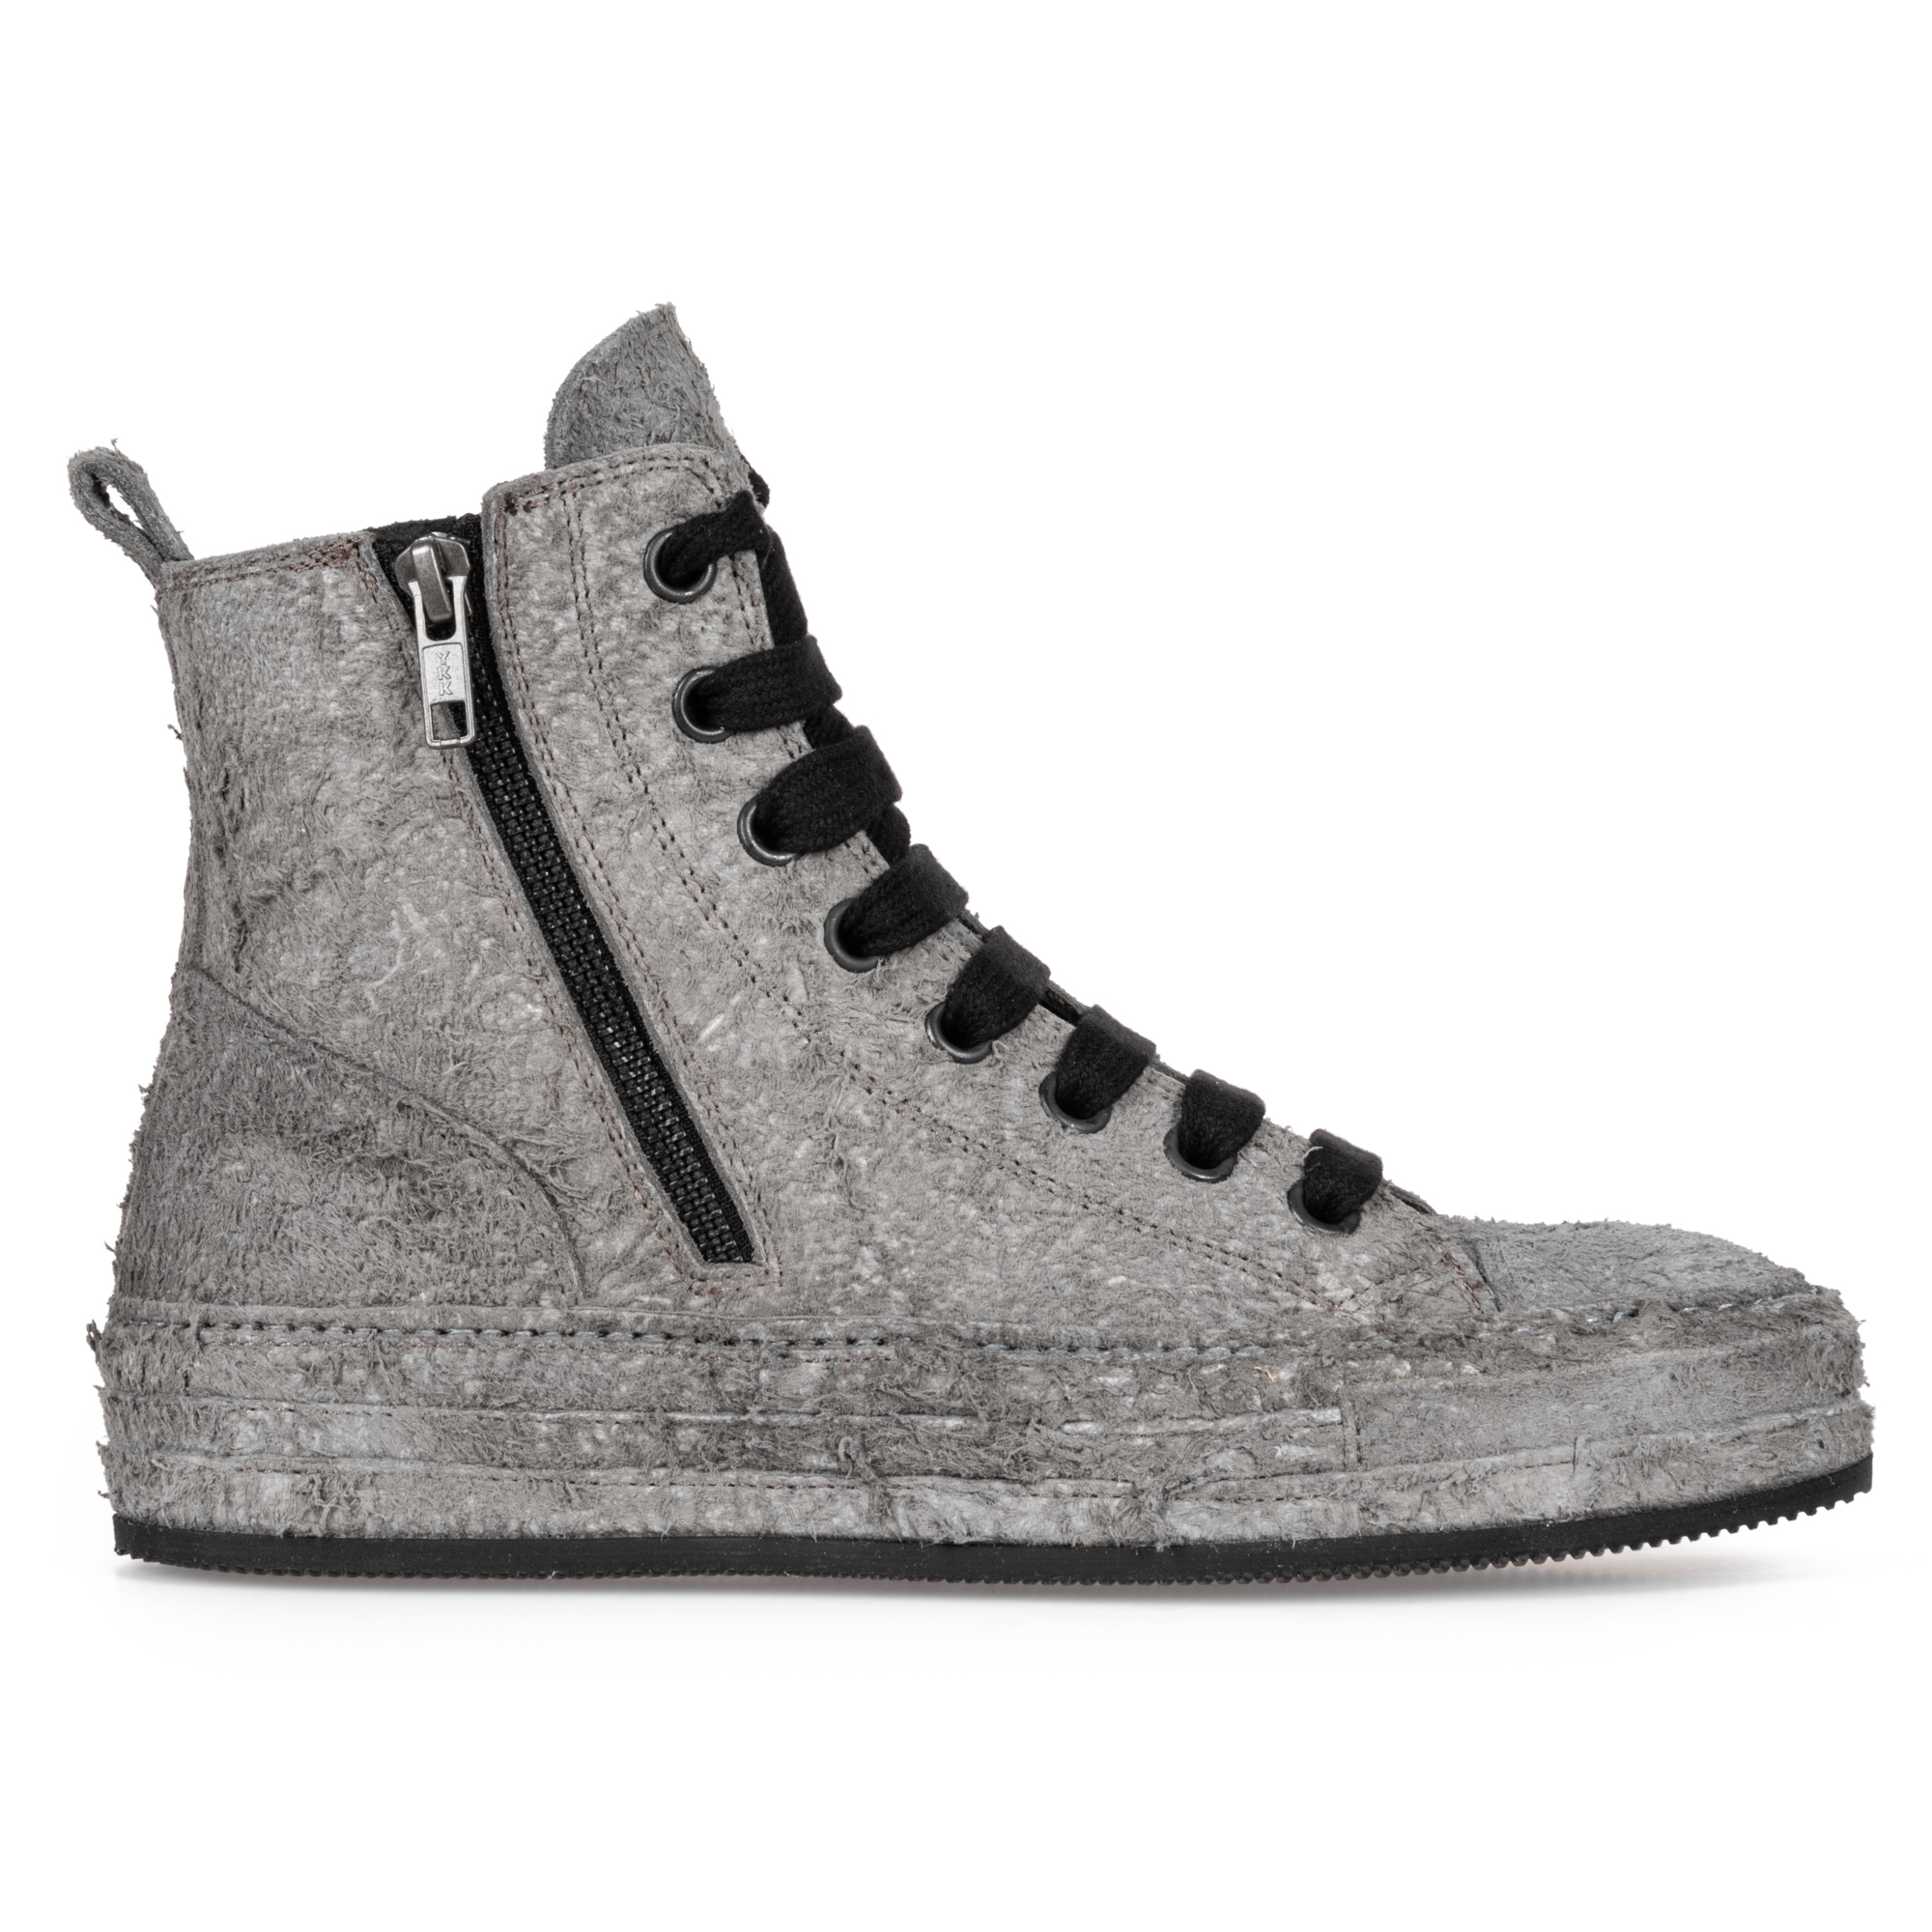 STORM GREY SUEDE LEATHER HIGH TOP 